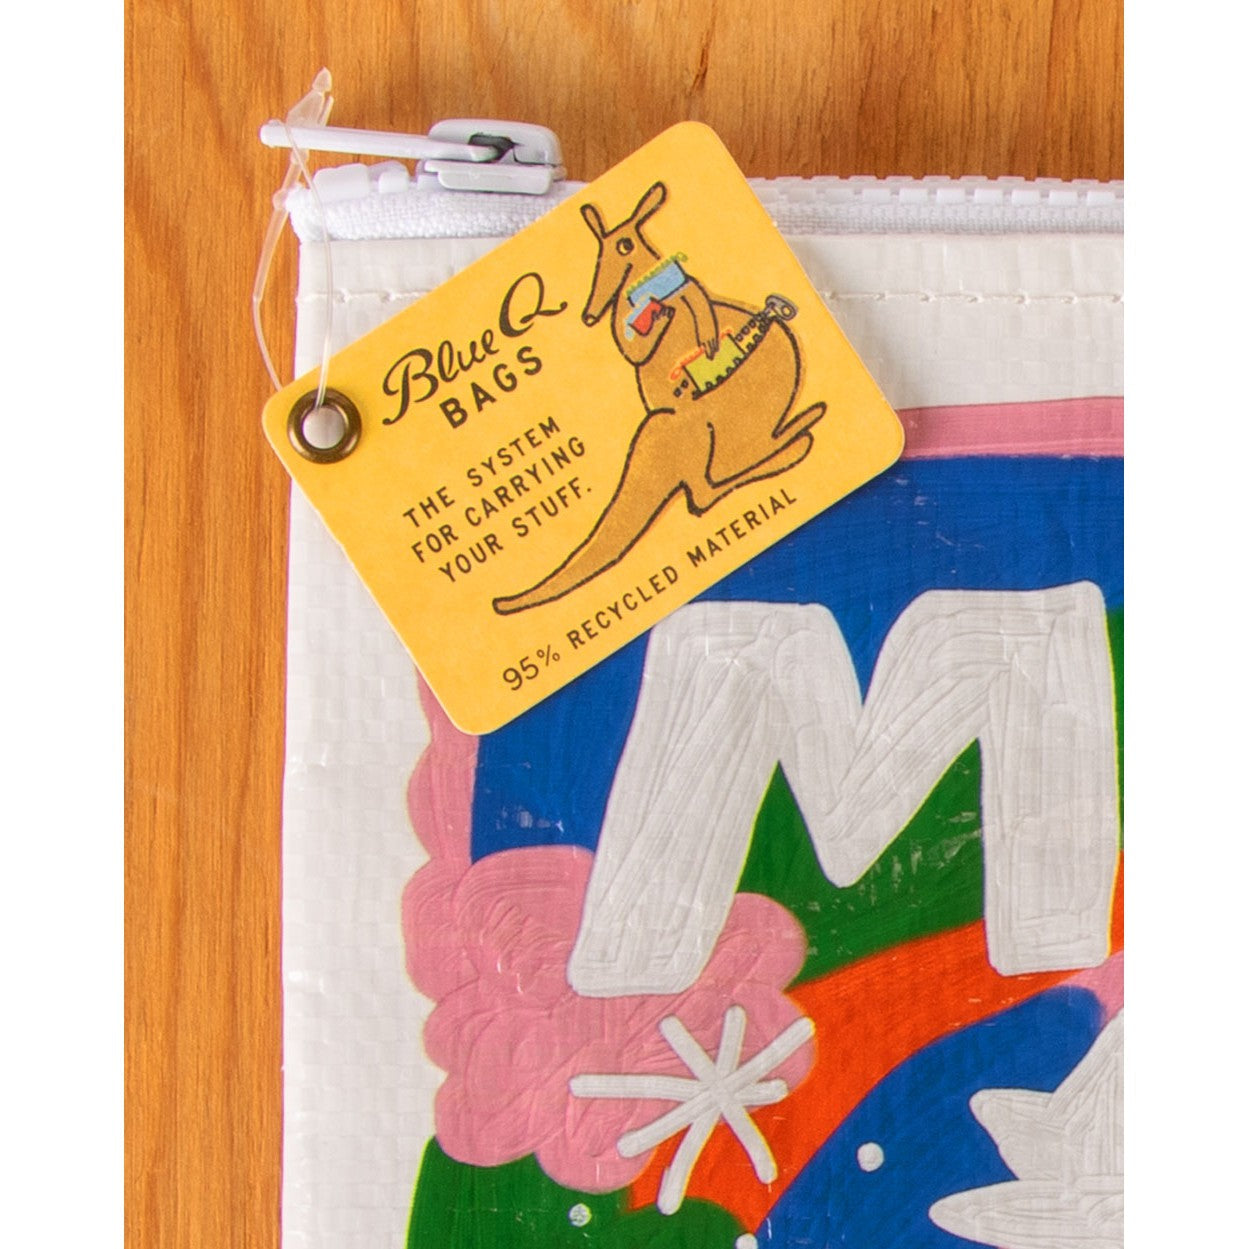 Messy By Nature Zipper Pouch | Recycled Material Case Storage Organizer | 7.25" x 9.5"